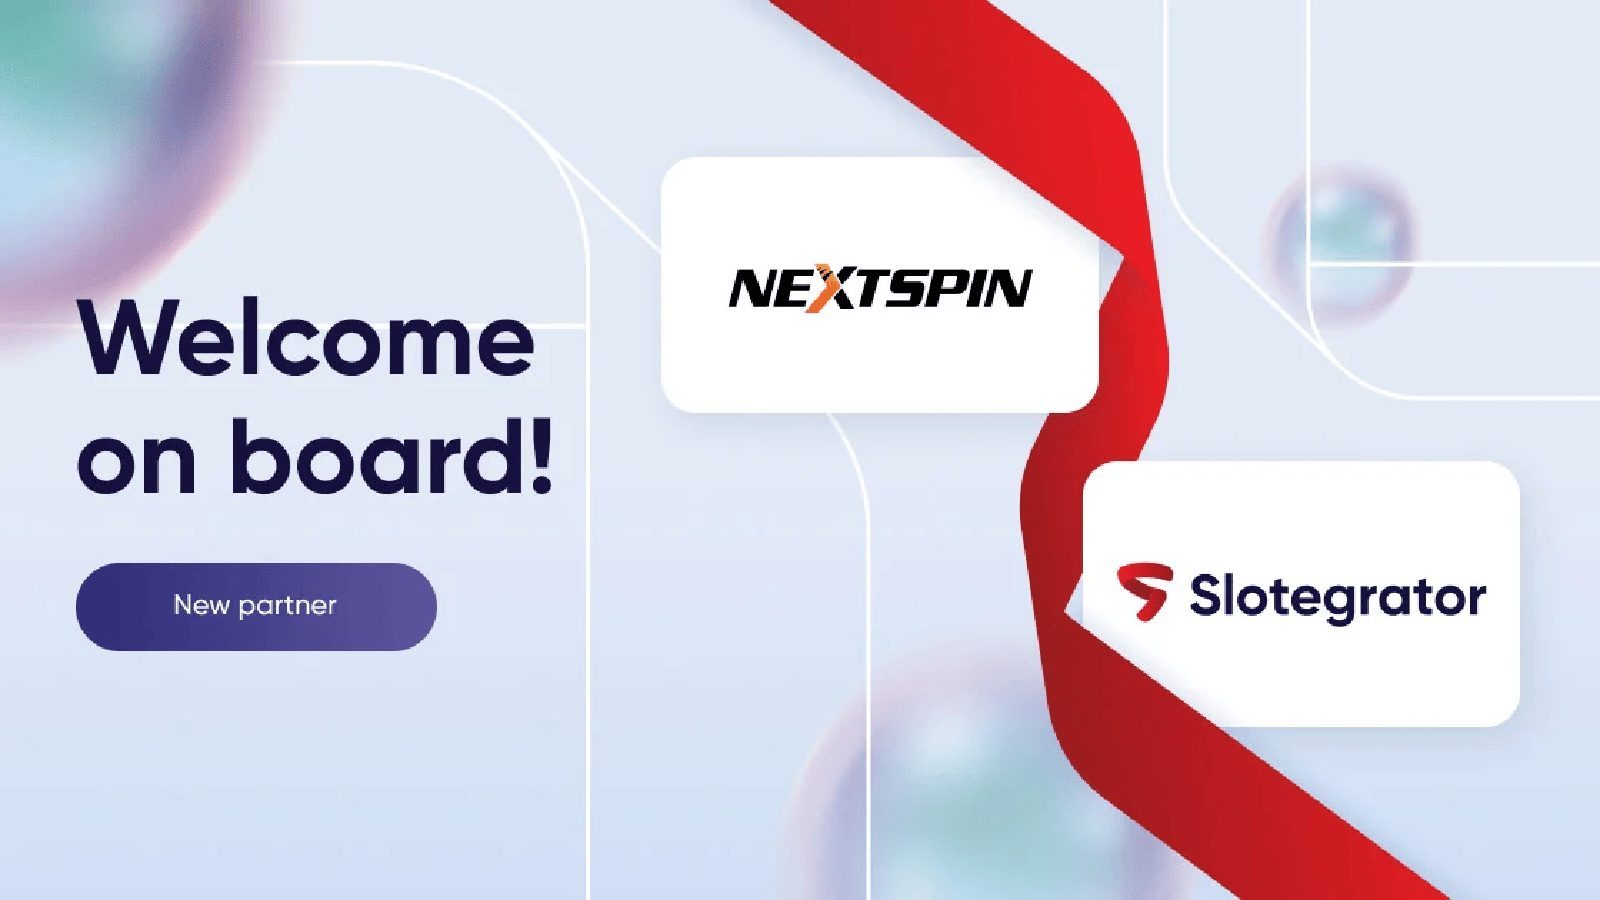 Slotegrator's Partnership with Nextspin